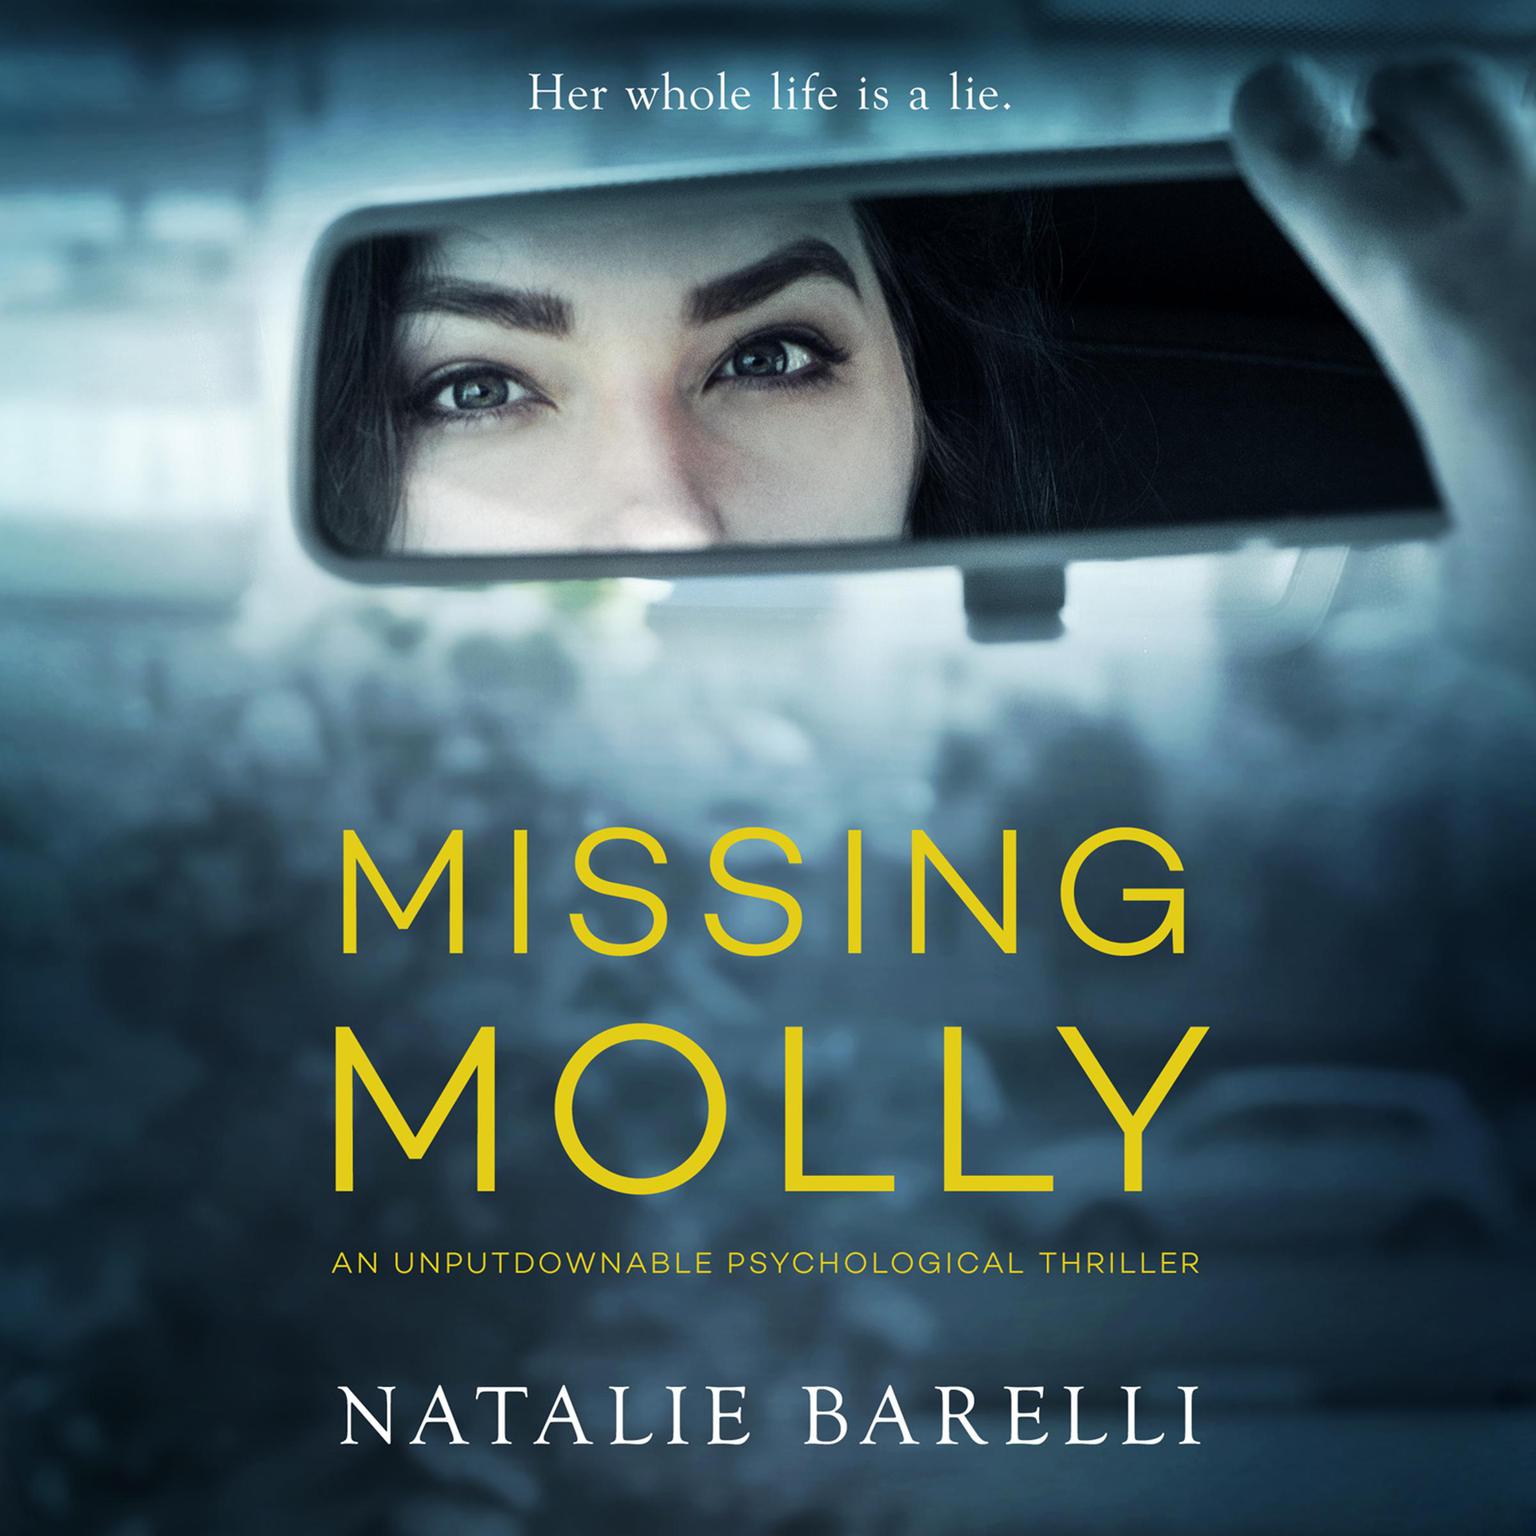 Missing Molly Audiobook, by Natalie Barelli